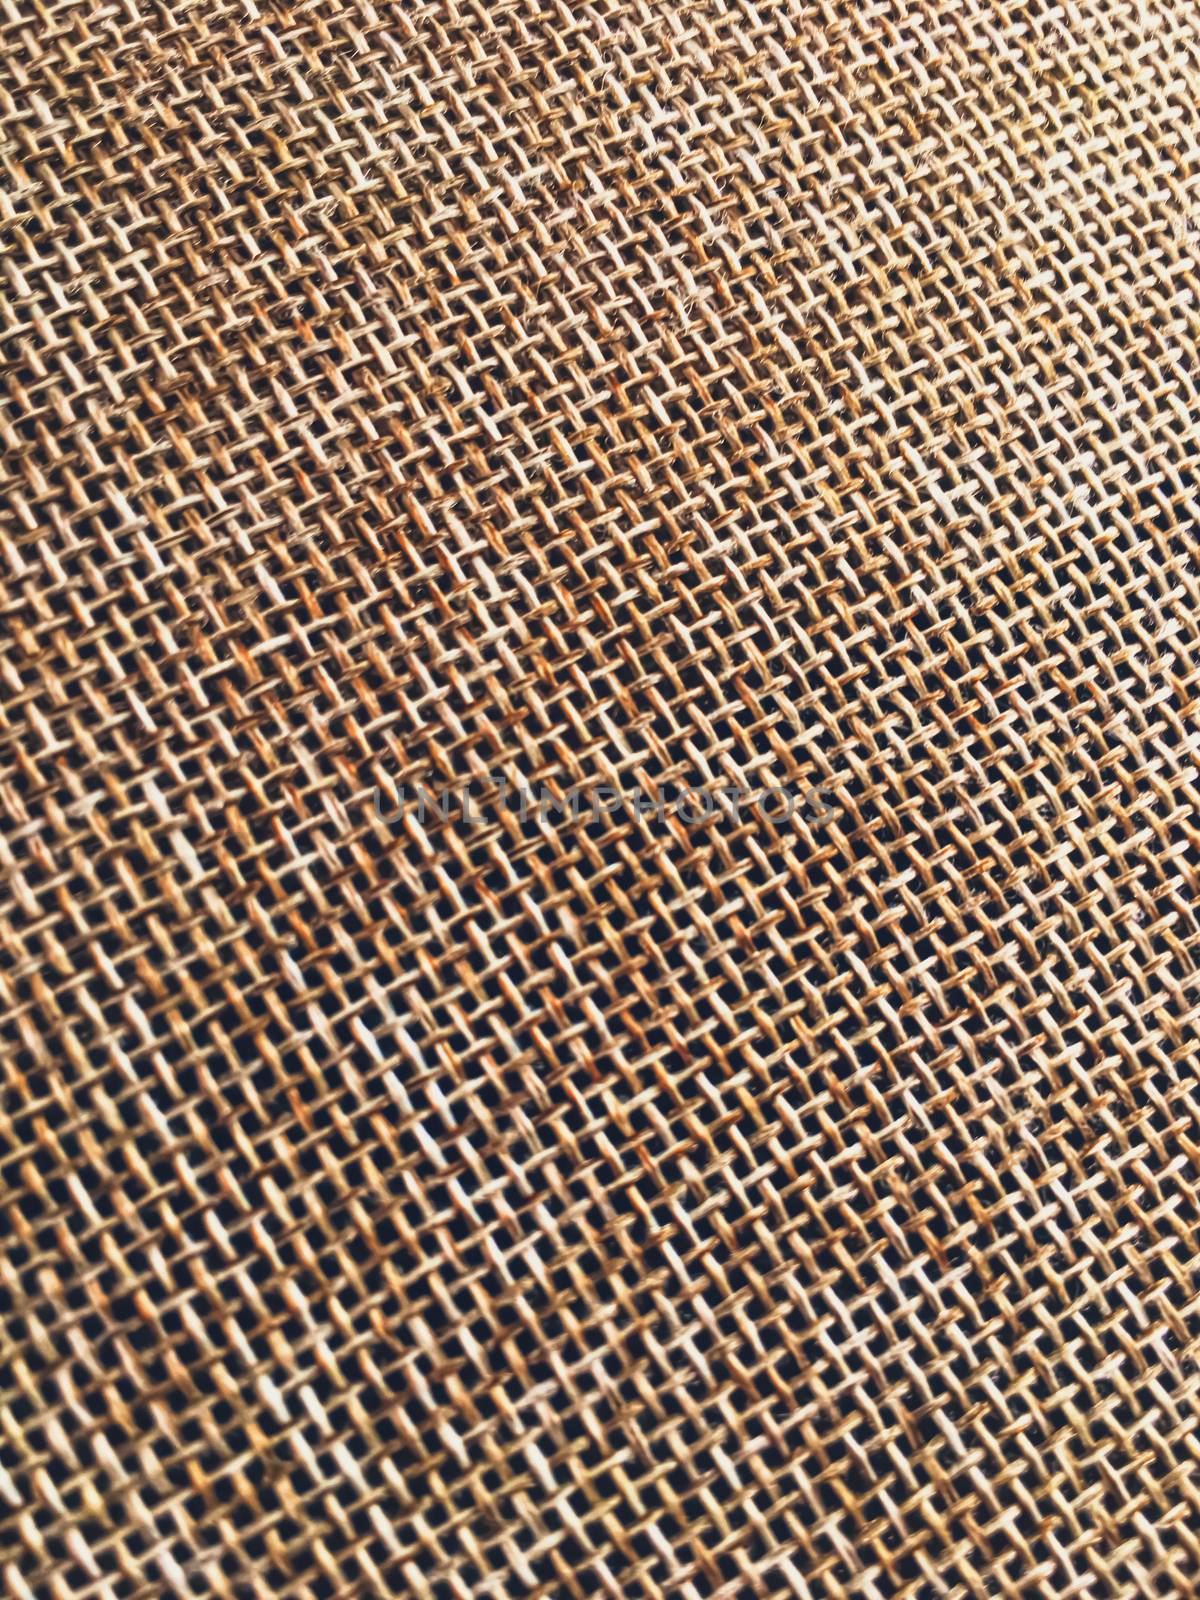 Linen texture as rustic background, fabric and material